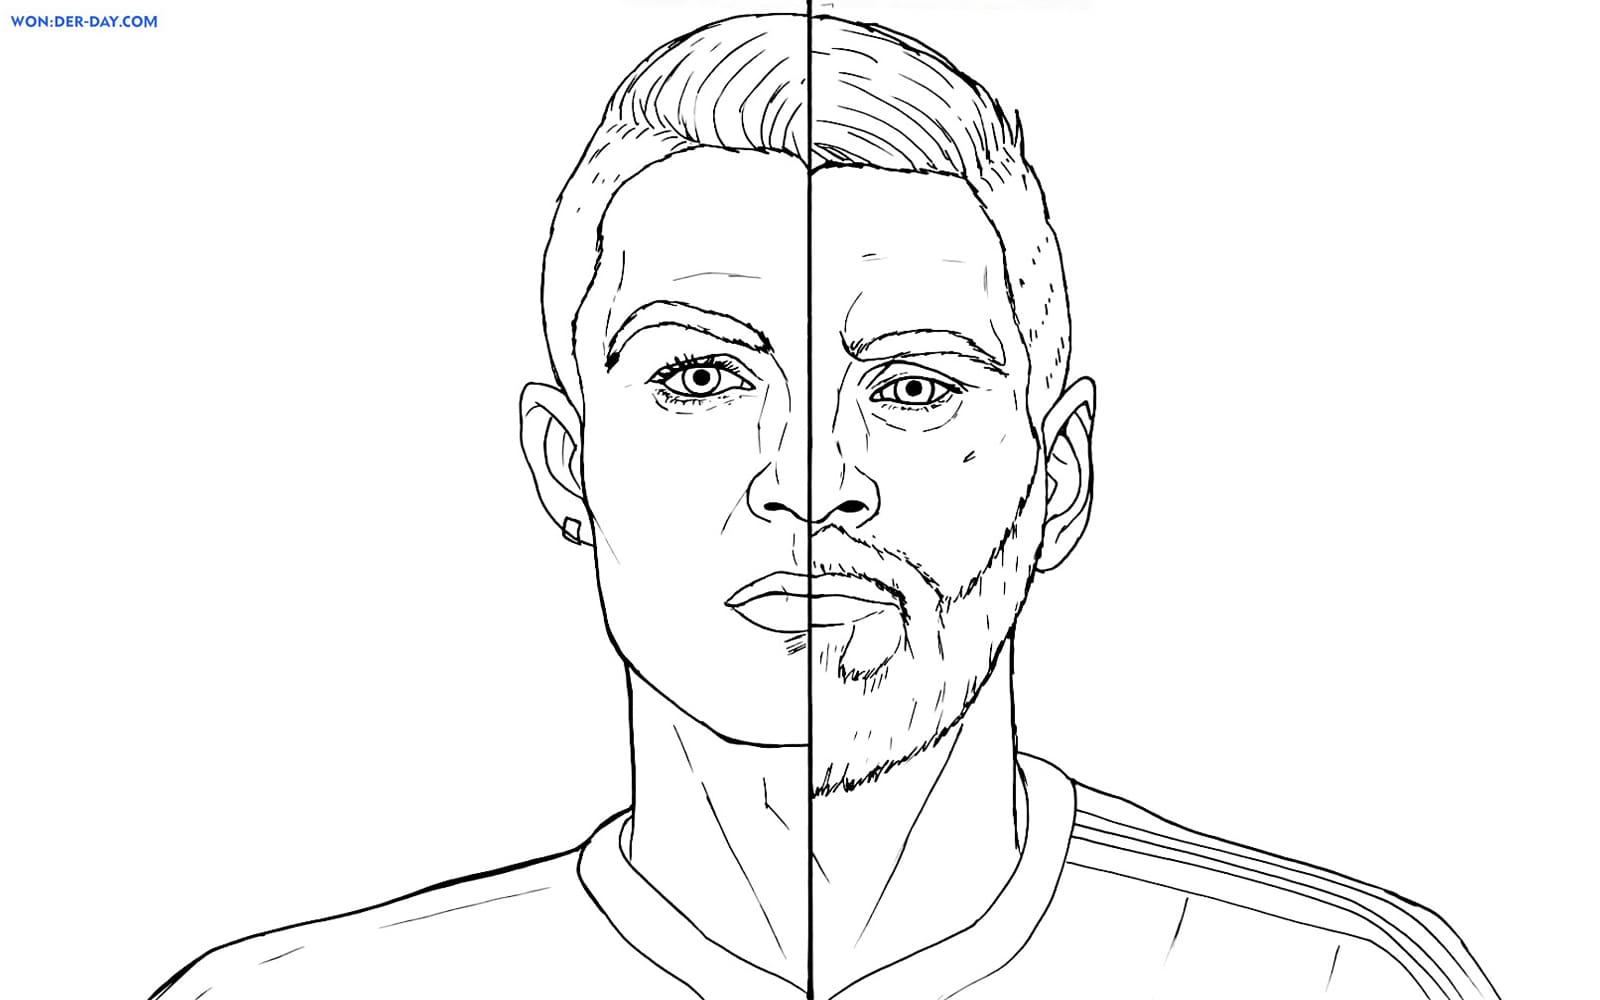 Cristiano ronaldo coloring pages wonder day â coloring pages for children and adults